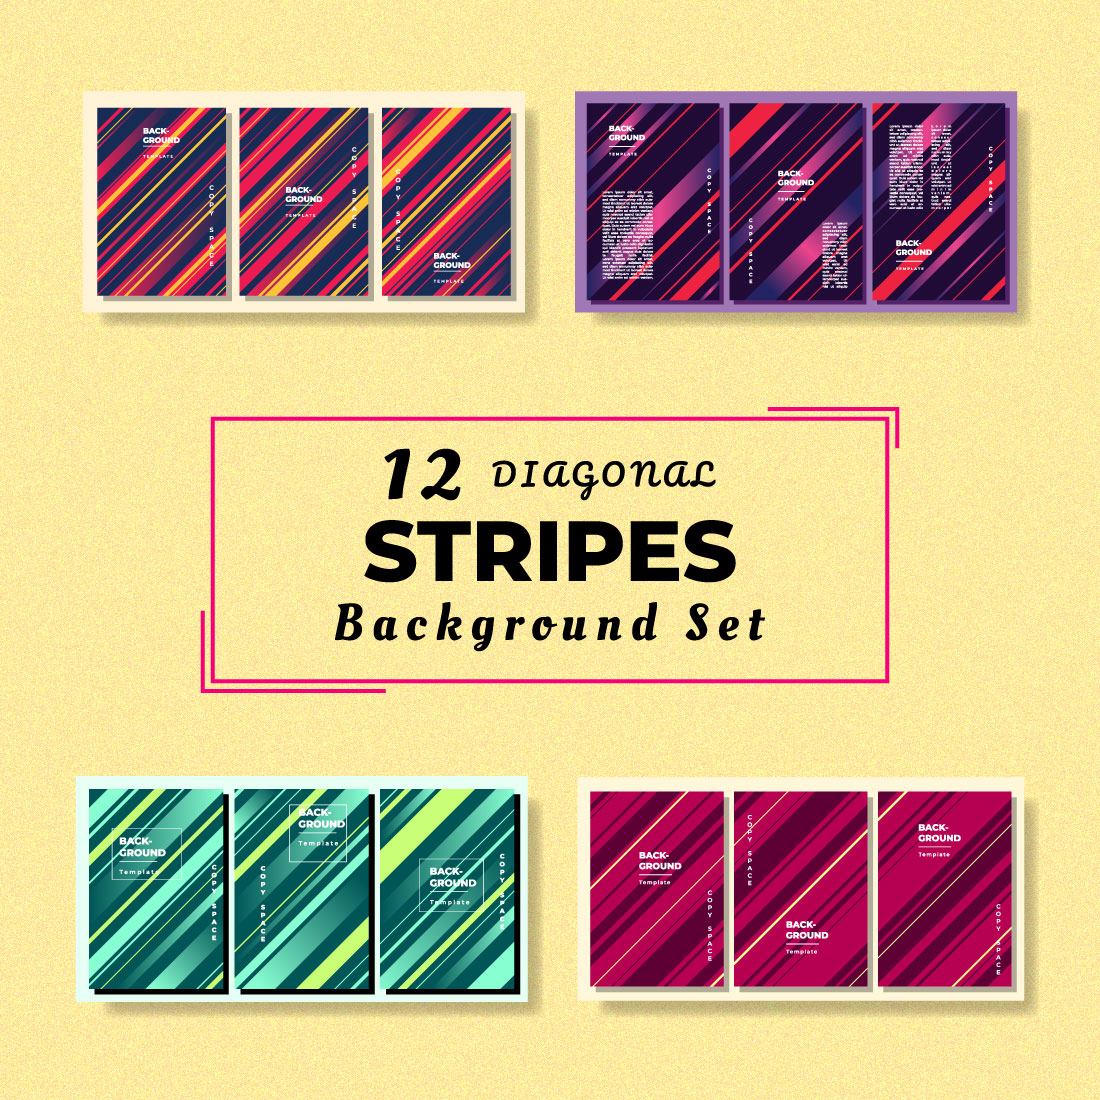 12 diagonal stripes background set in portrait style cover image.